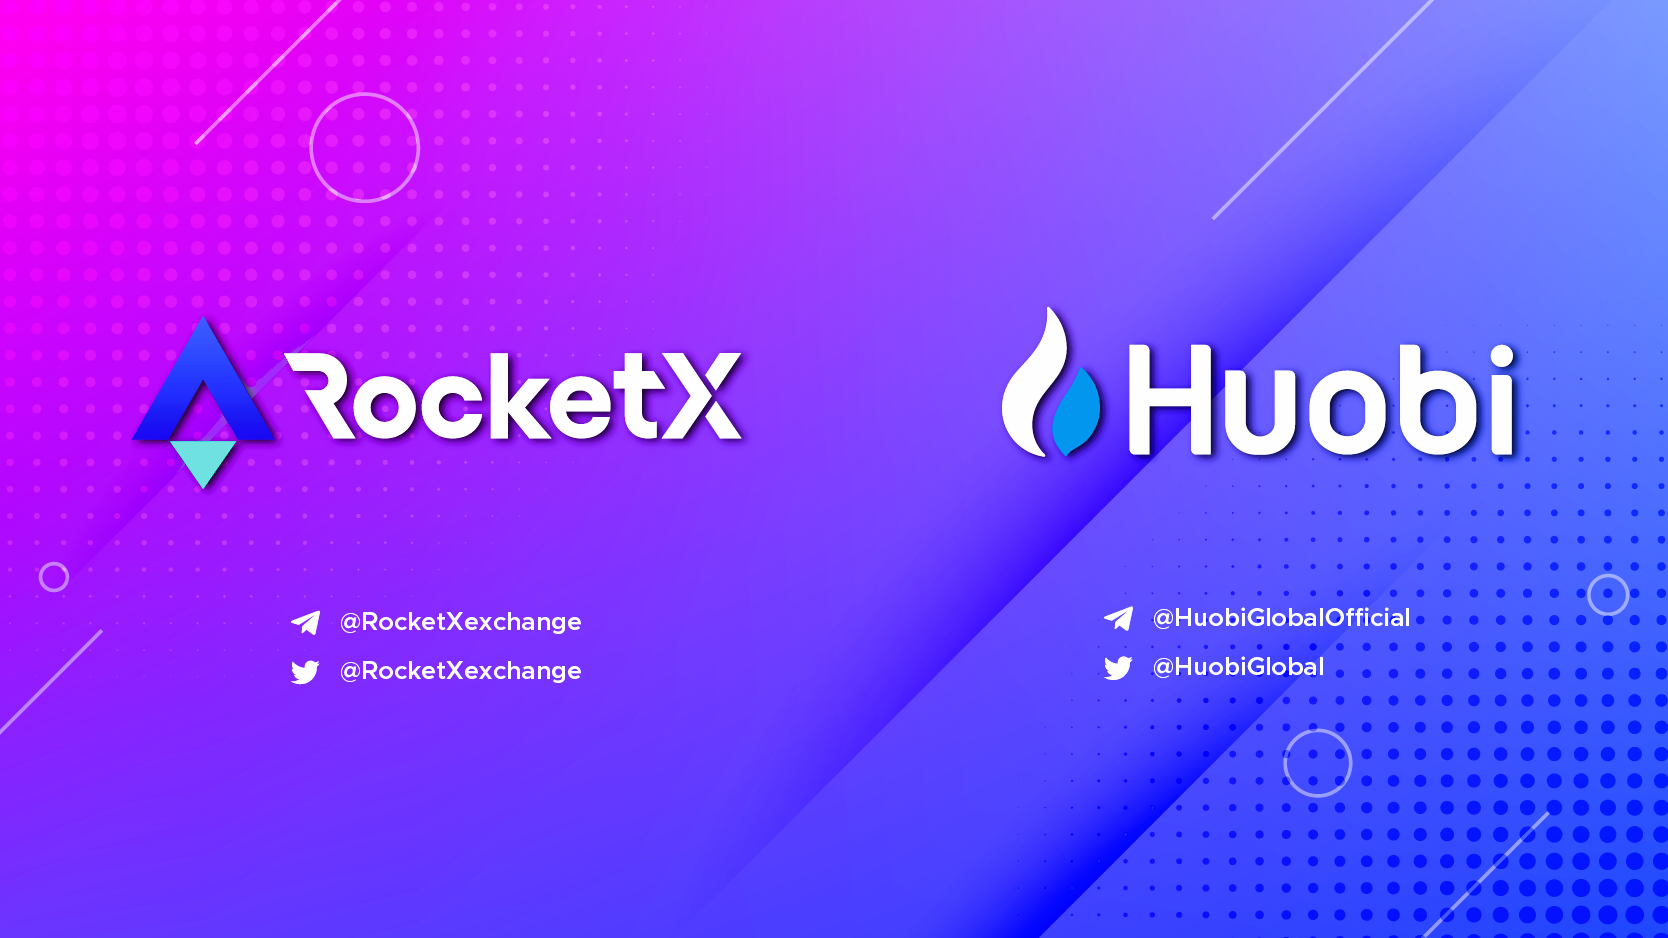 RocketX Announces Partnership with Huobi Exchange to Enable Decentralized Access to Its Deep Liquidity